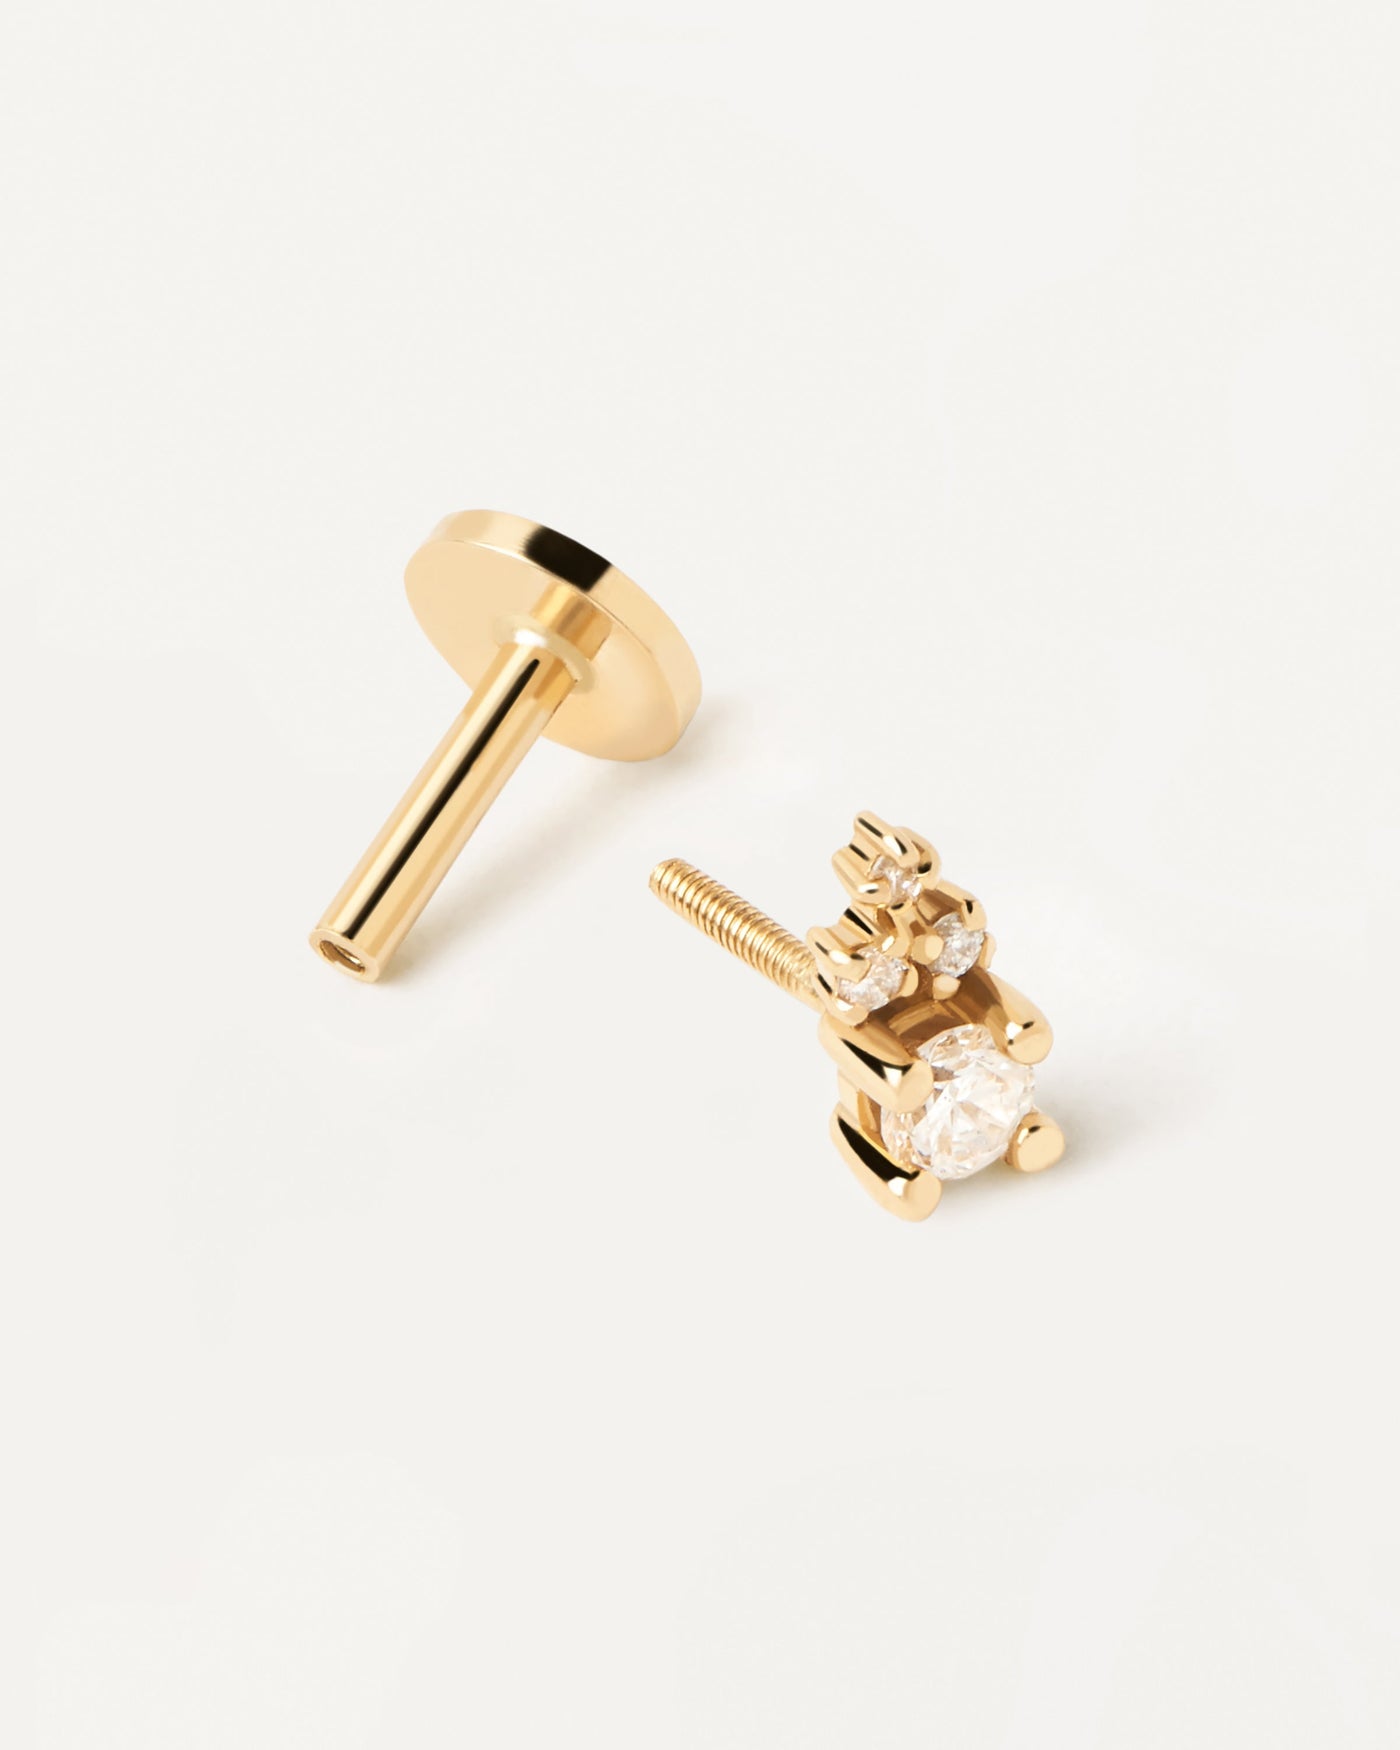 2023 Selection | Diamonds and gold Chelsea Single Earring. Solid yellow gold ear piercing with dainty bright diamonds of 0.07 carat. Get the latest arrival from PDPAOLA. Place your order safely and get this Best Seller. Free Shipping.